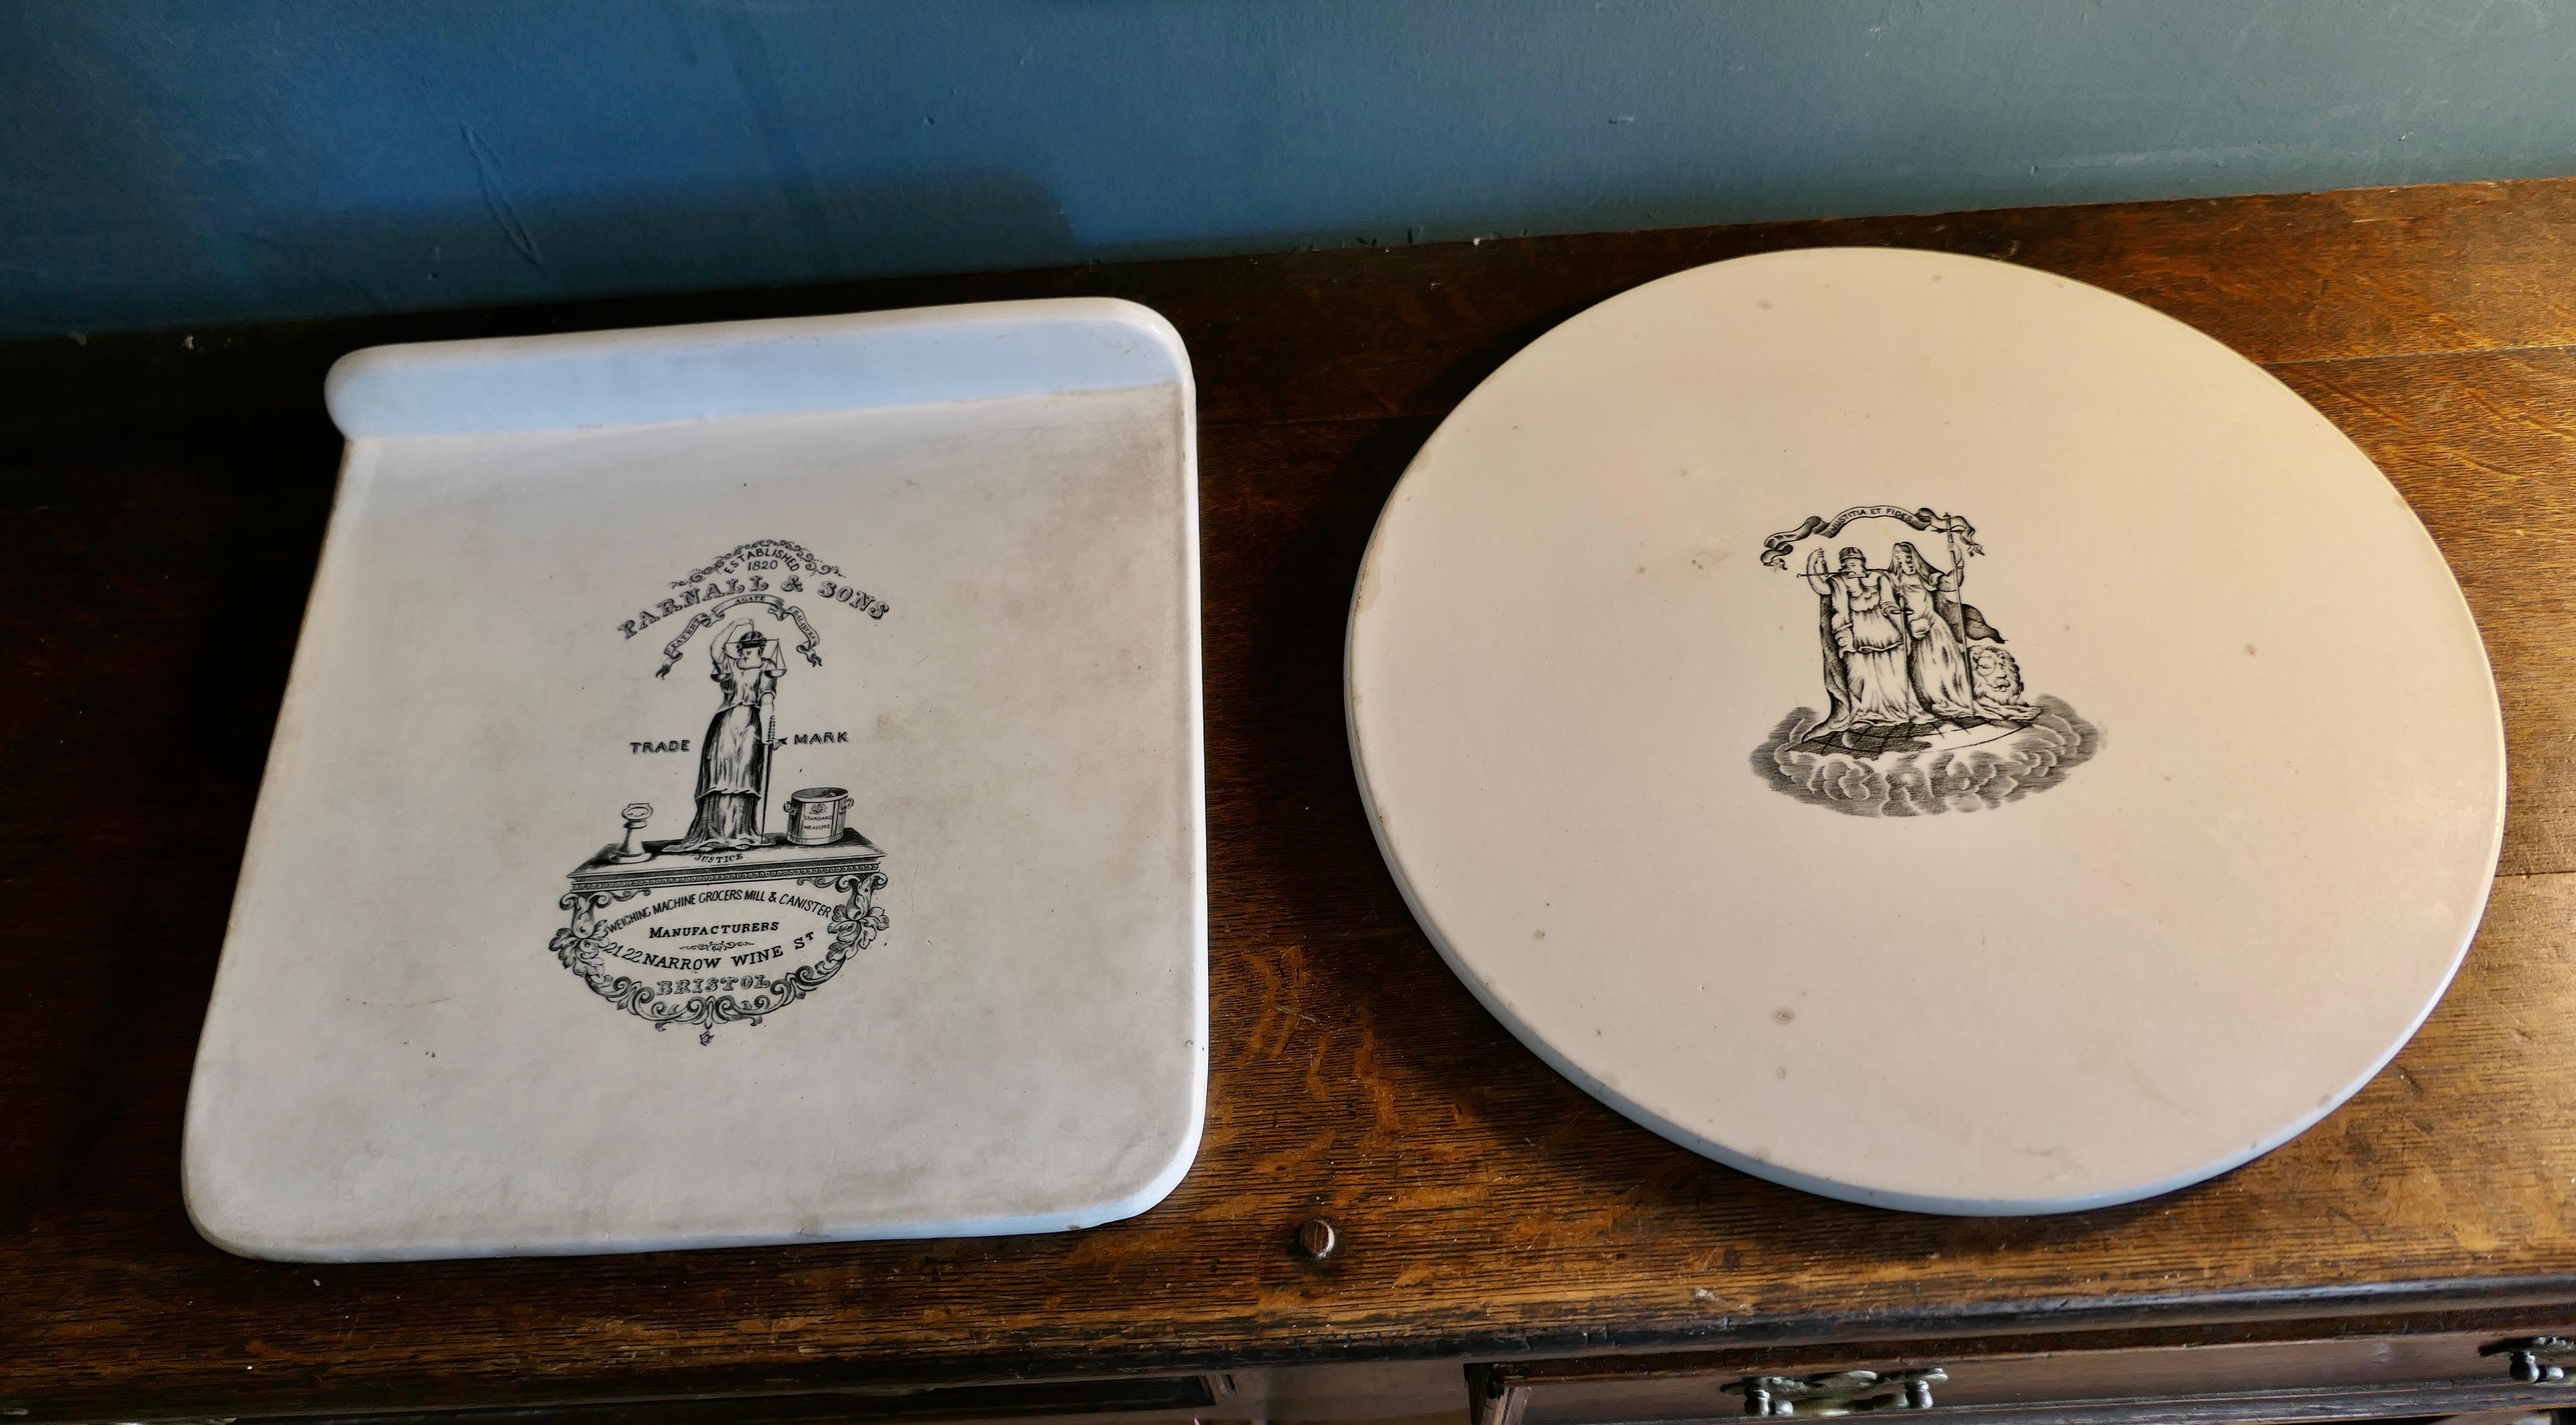 19th century Ceramic Butter Slab and Cheese Scale Pan

2 good honest pieces of Dairy Shop Equipment, the circular platter is a Butter slab used to portion and pat the block of butter into shape, the other larger square platter is from a Dairy